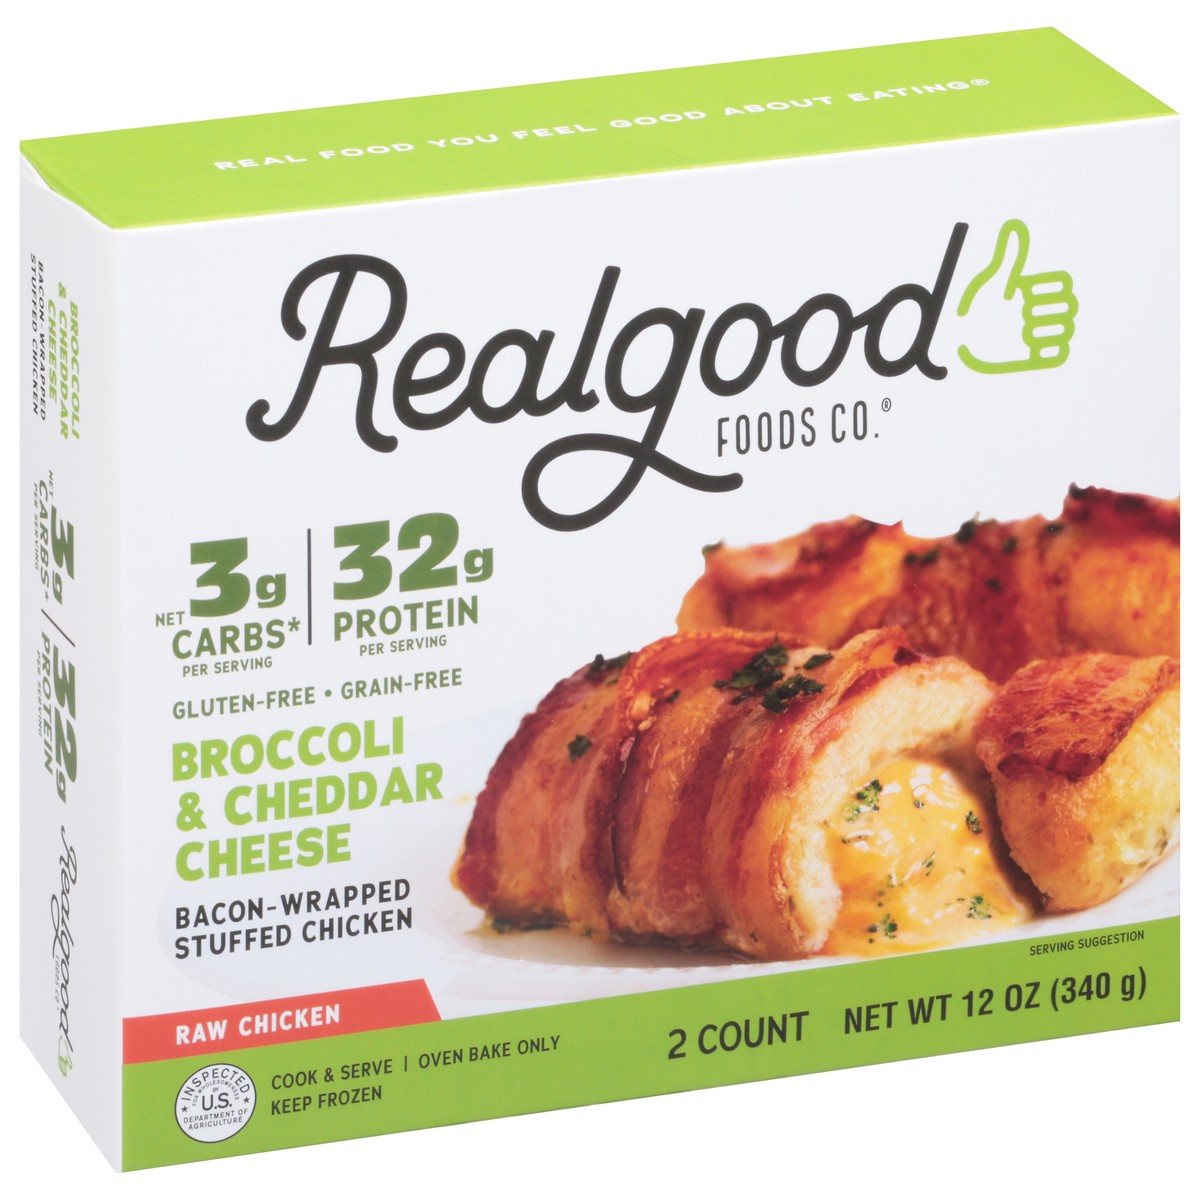 slide 2 of 11, Realgood Foods Co. Broccoli & Cheddar Cheese Bacon-Wrapped Stuffed Chicken 2 ea, 12 oz